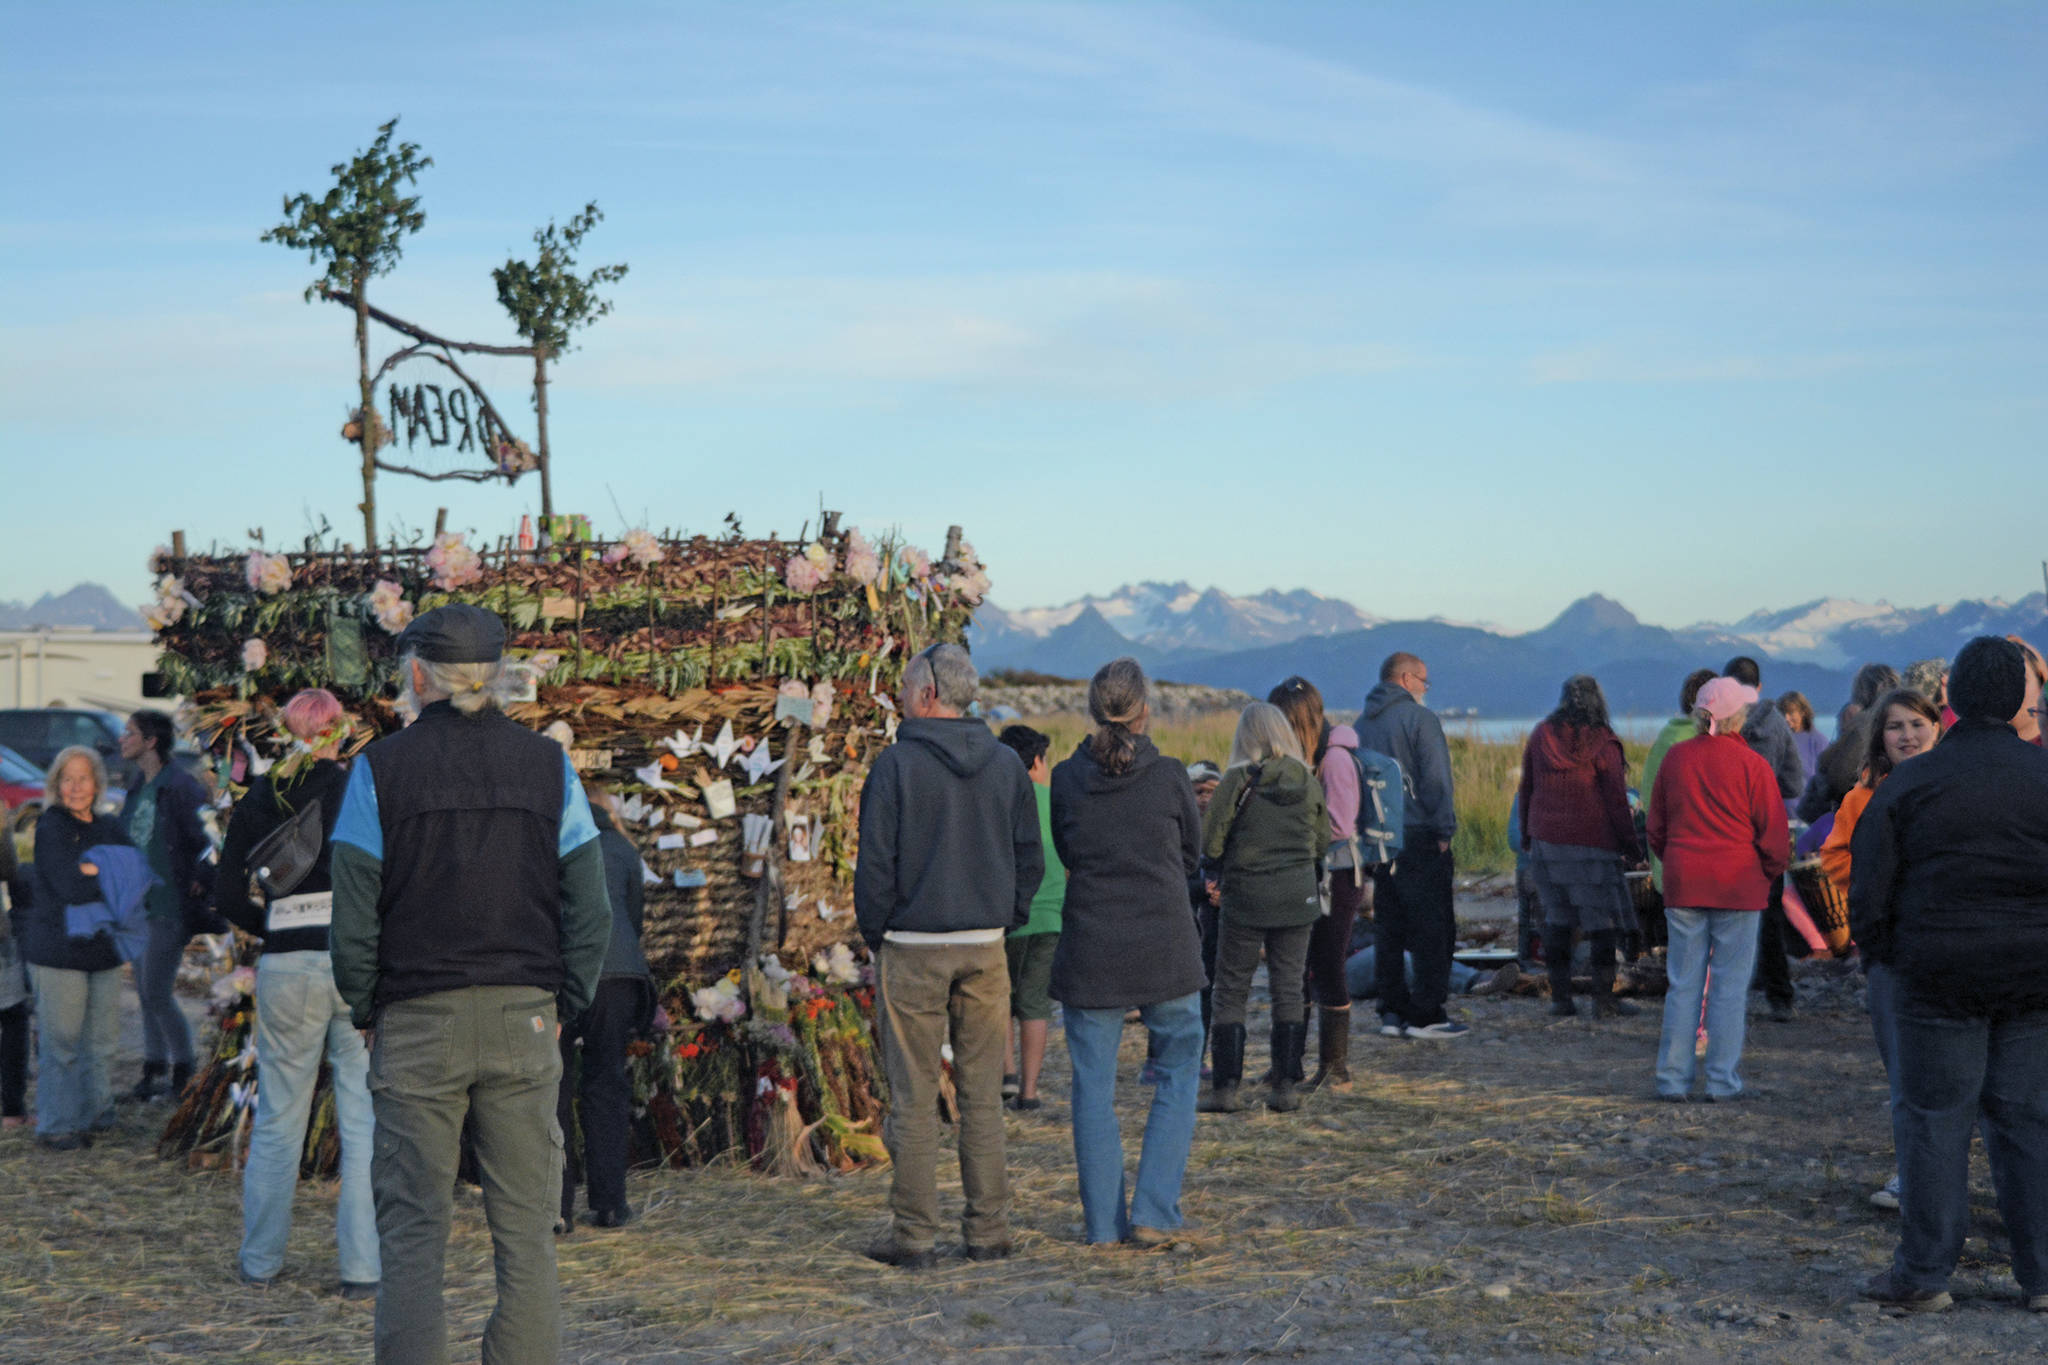 Visitors interact with the 2018 Burning Basket, Dream, on Sept. 9, 2018, at Mariner Park in Homer, Alaska. (Photo by Michael Armstrong/Homer News)